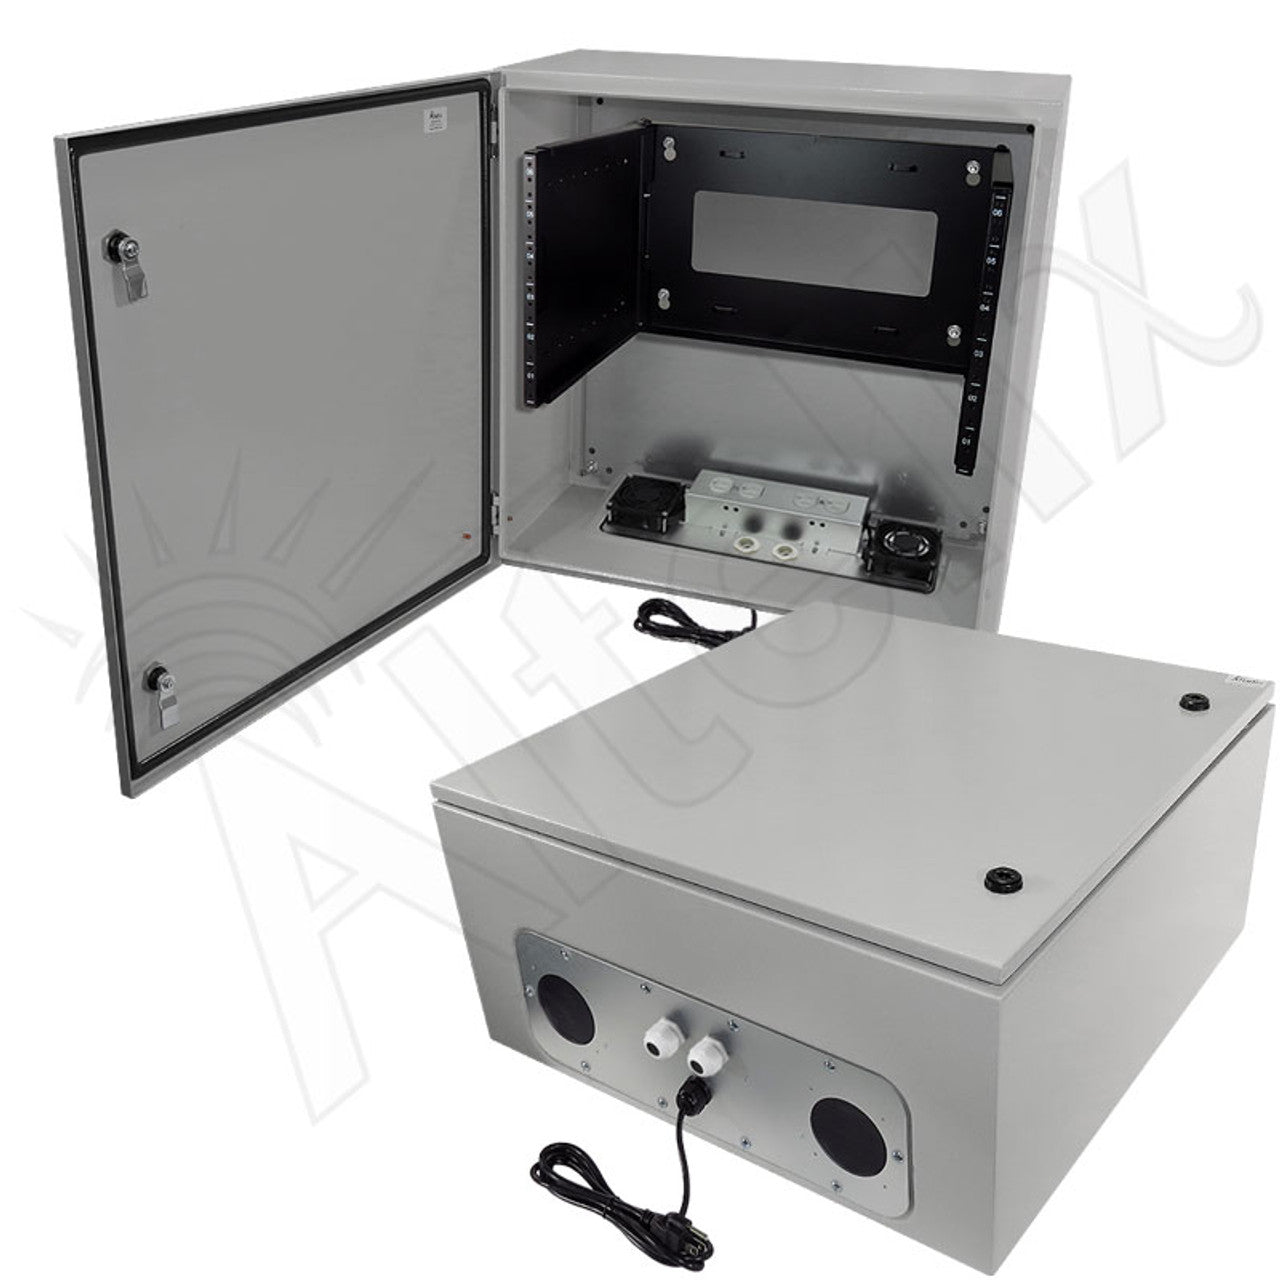 Altelix 19" Wide 6U Rack Steel Weatherproof NEMA Enclosure with Dual Cooling Fans, 120 VAC Outlets and Power Cord-1